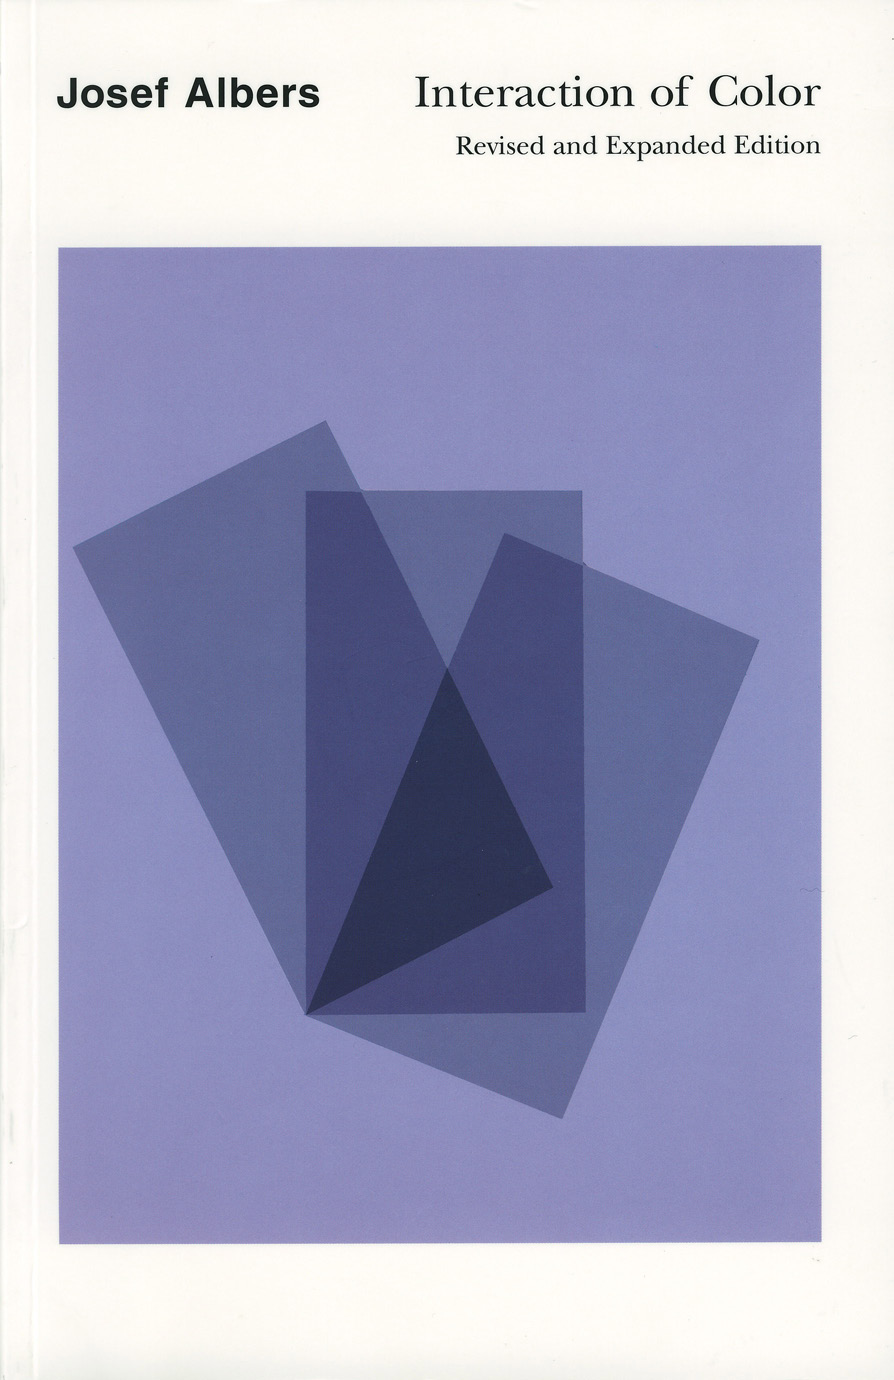 Interaction of Color, Josef Albers